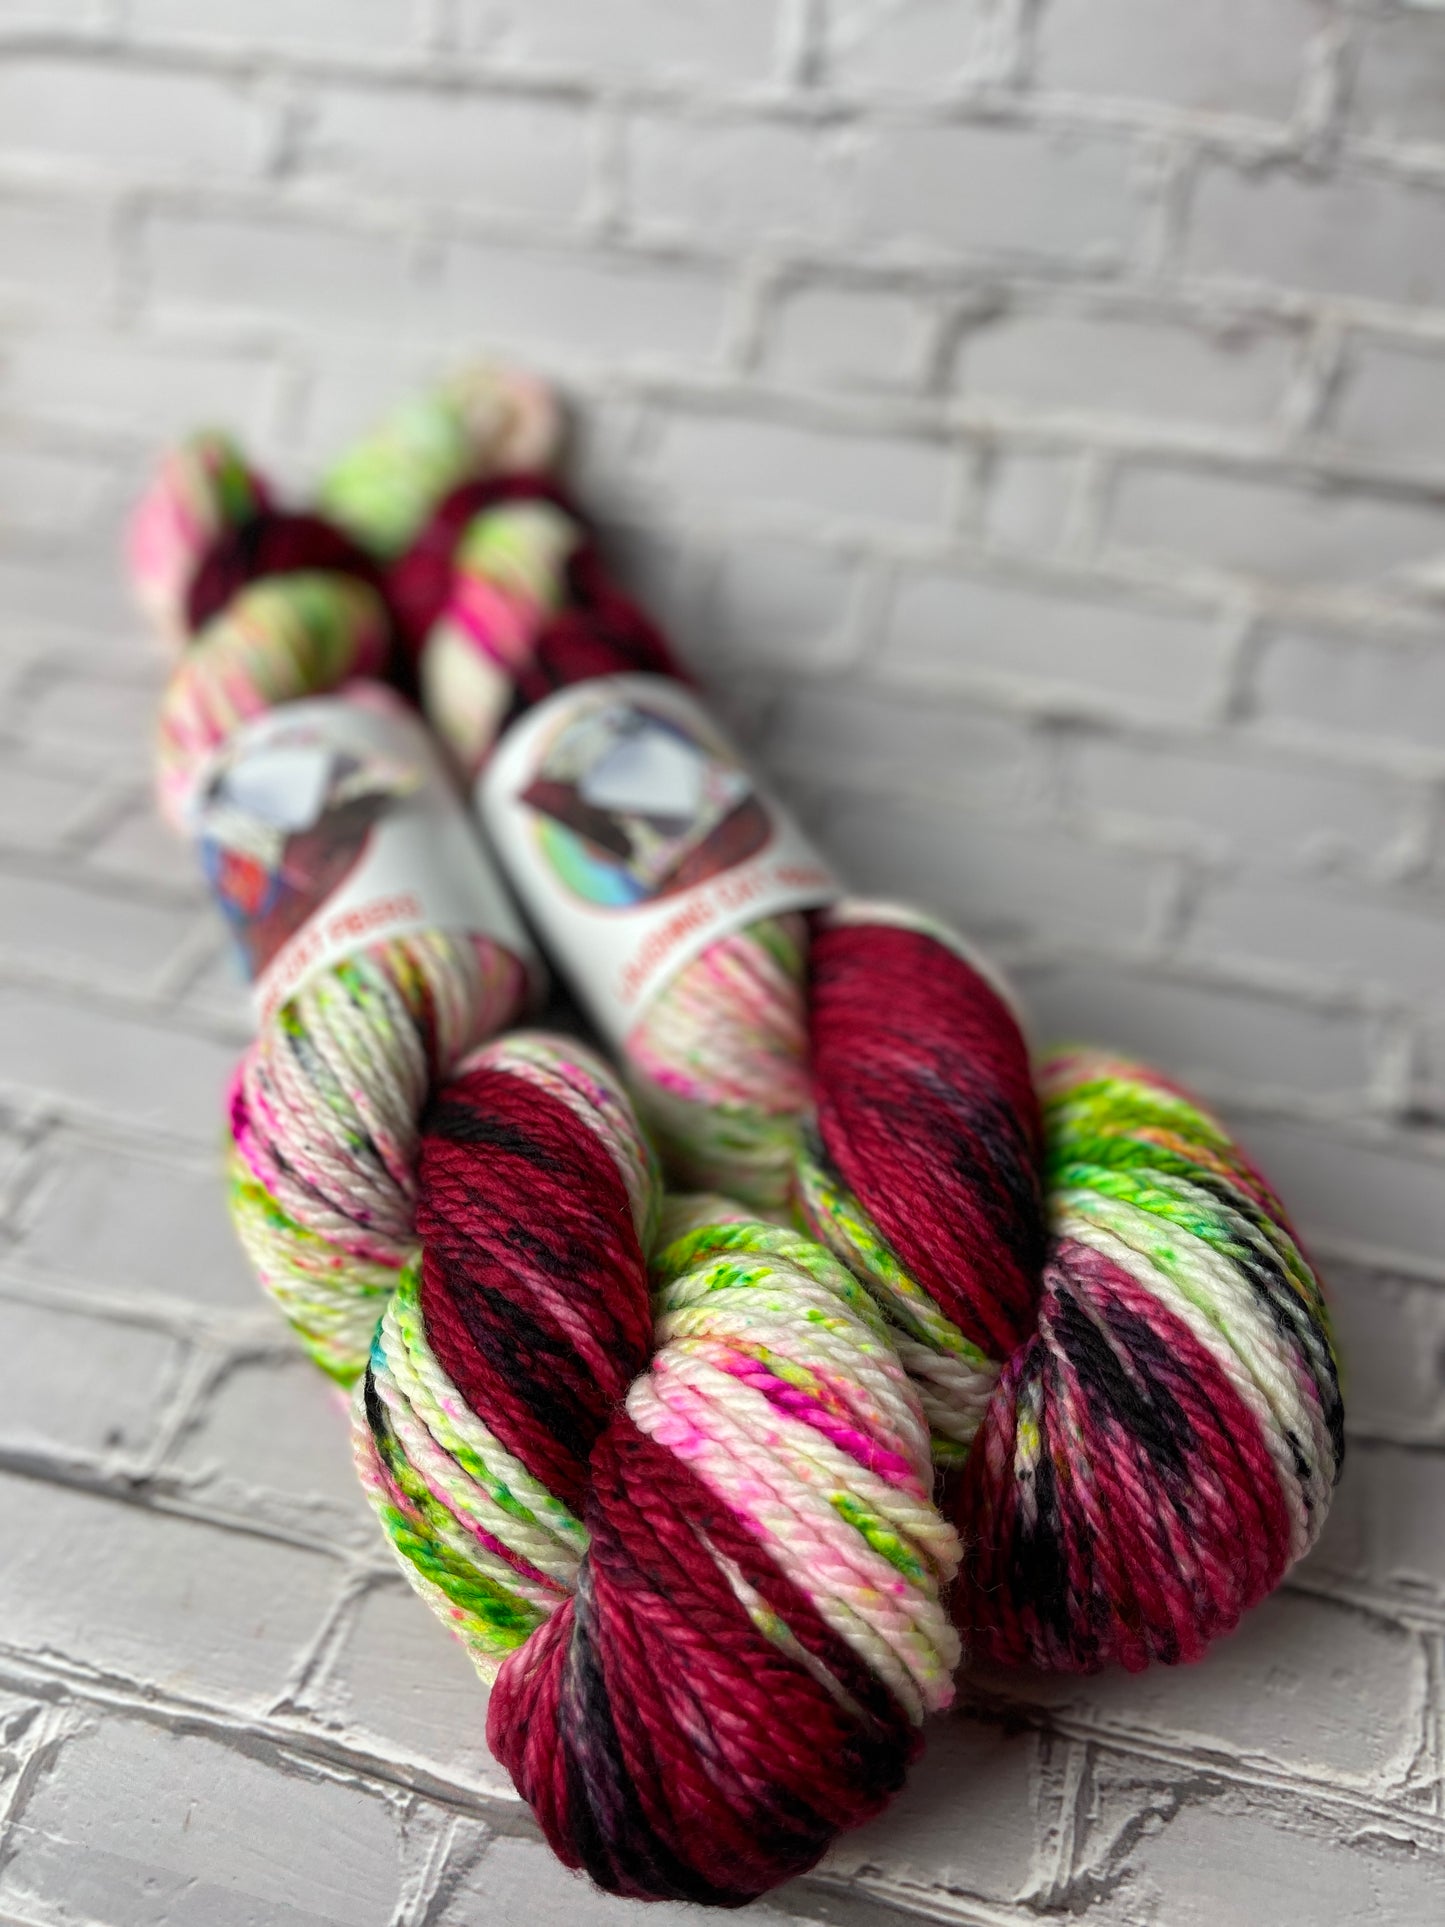 "Offred" on Various Yarn Bases